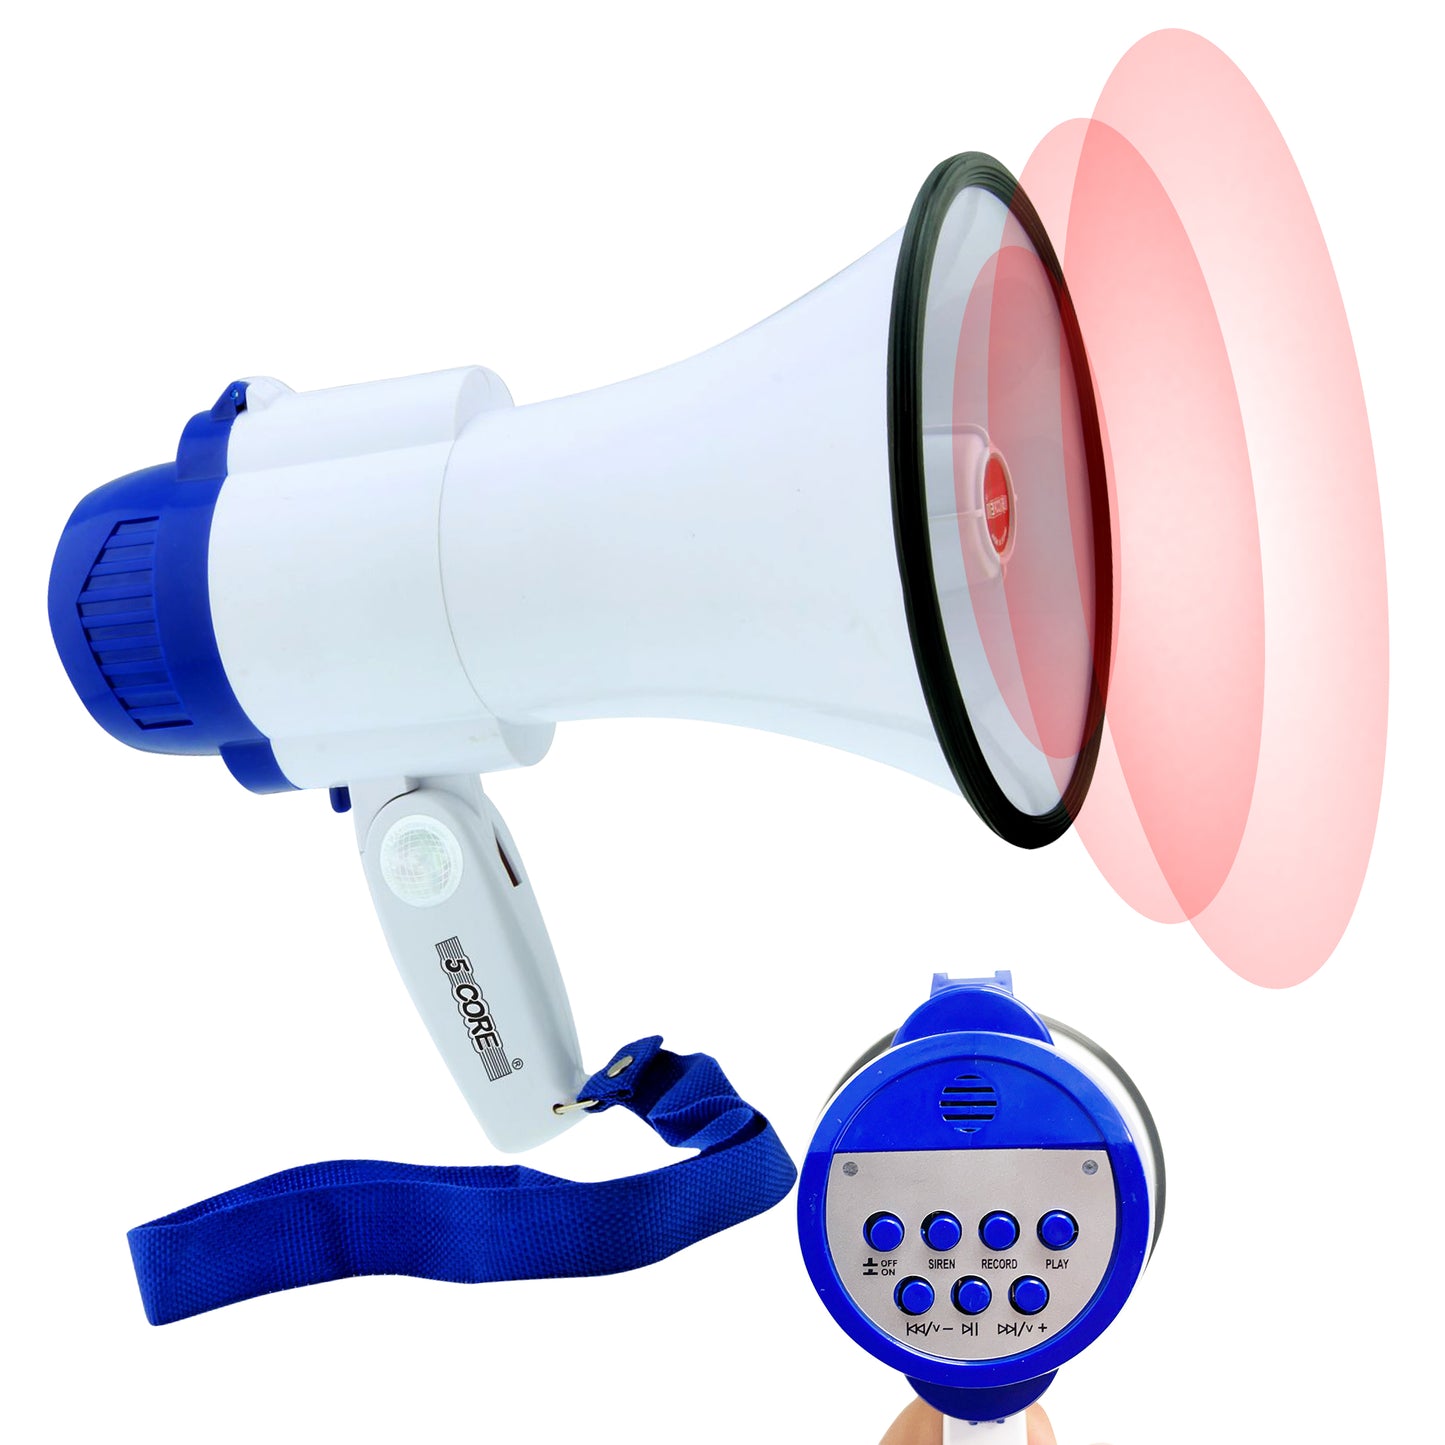 5 Core Megaphone Speakers Amplifier | 10W White-Blue Megaphone with Recording, Volume Control, and Siren Alarm| Battery Operated and Foldable Handle | Bullhorn Speaker with Blue Strap- 8R